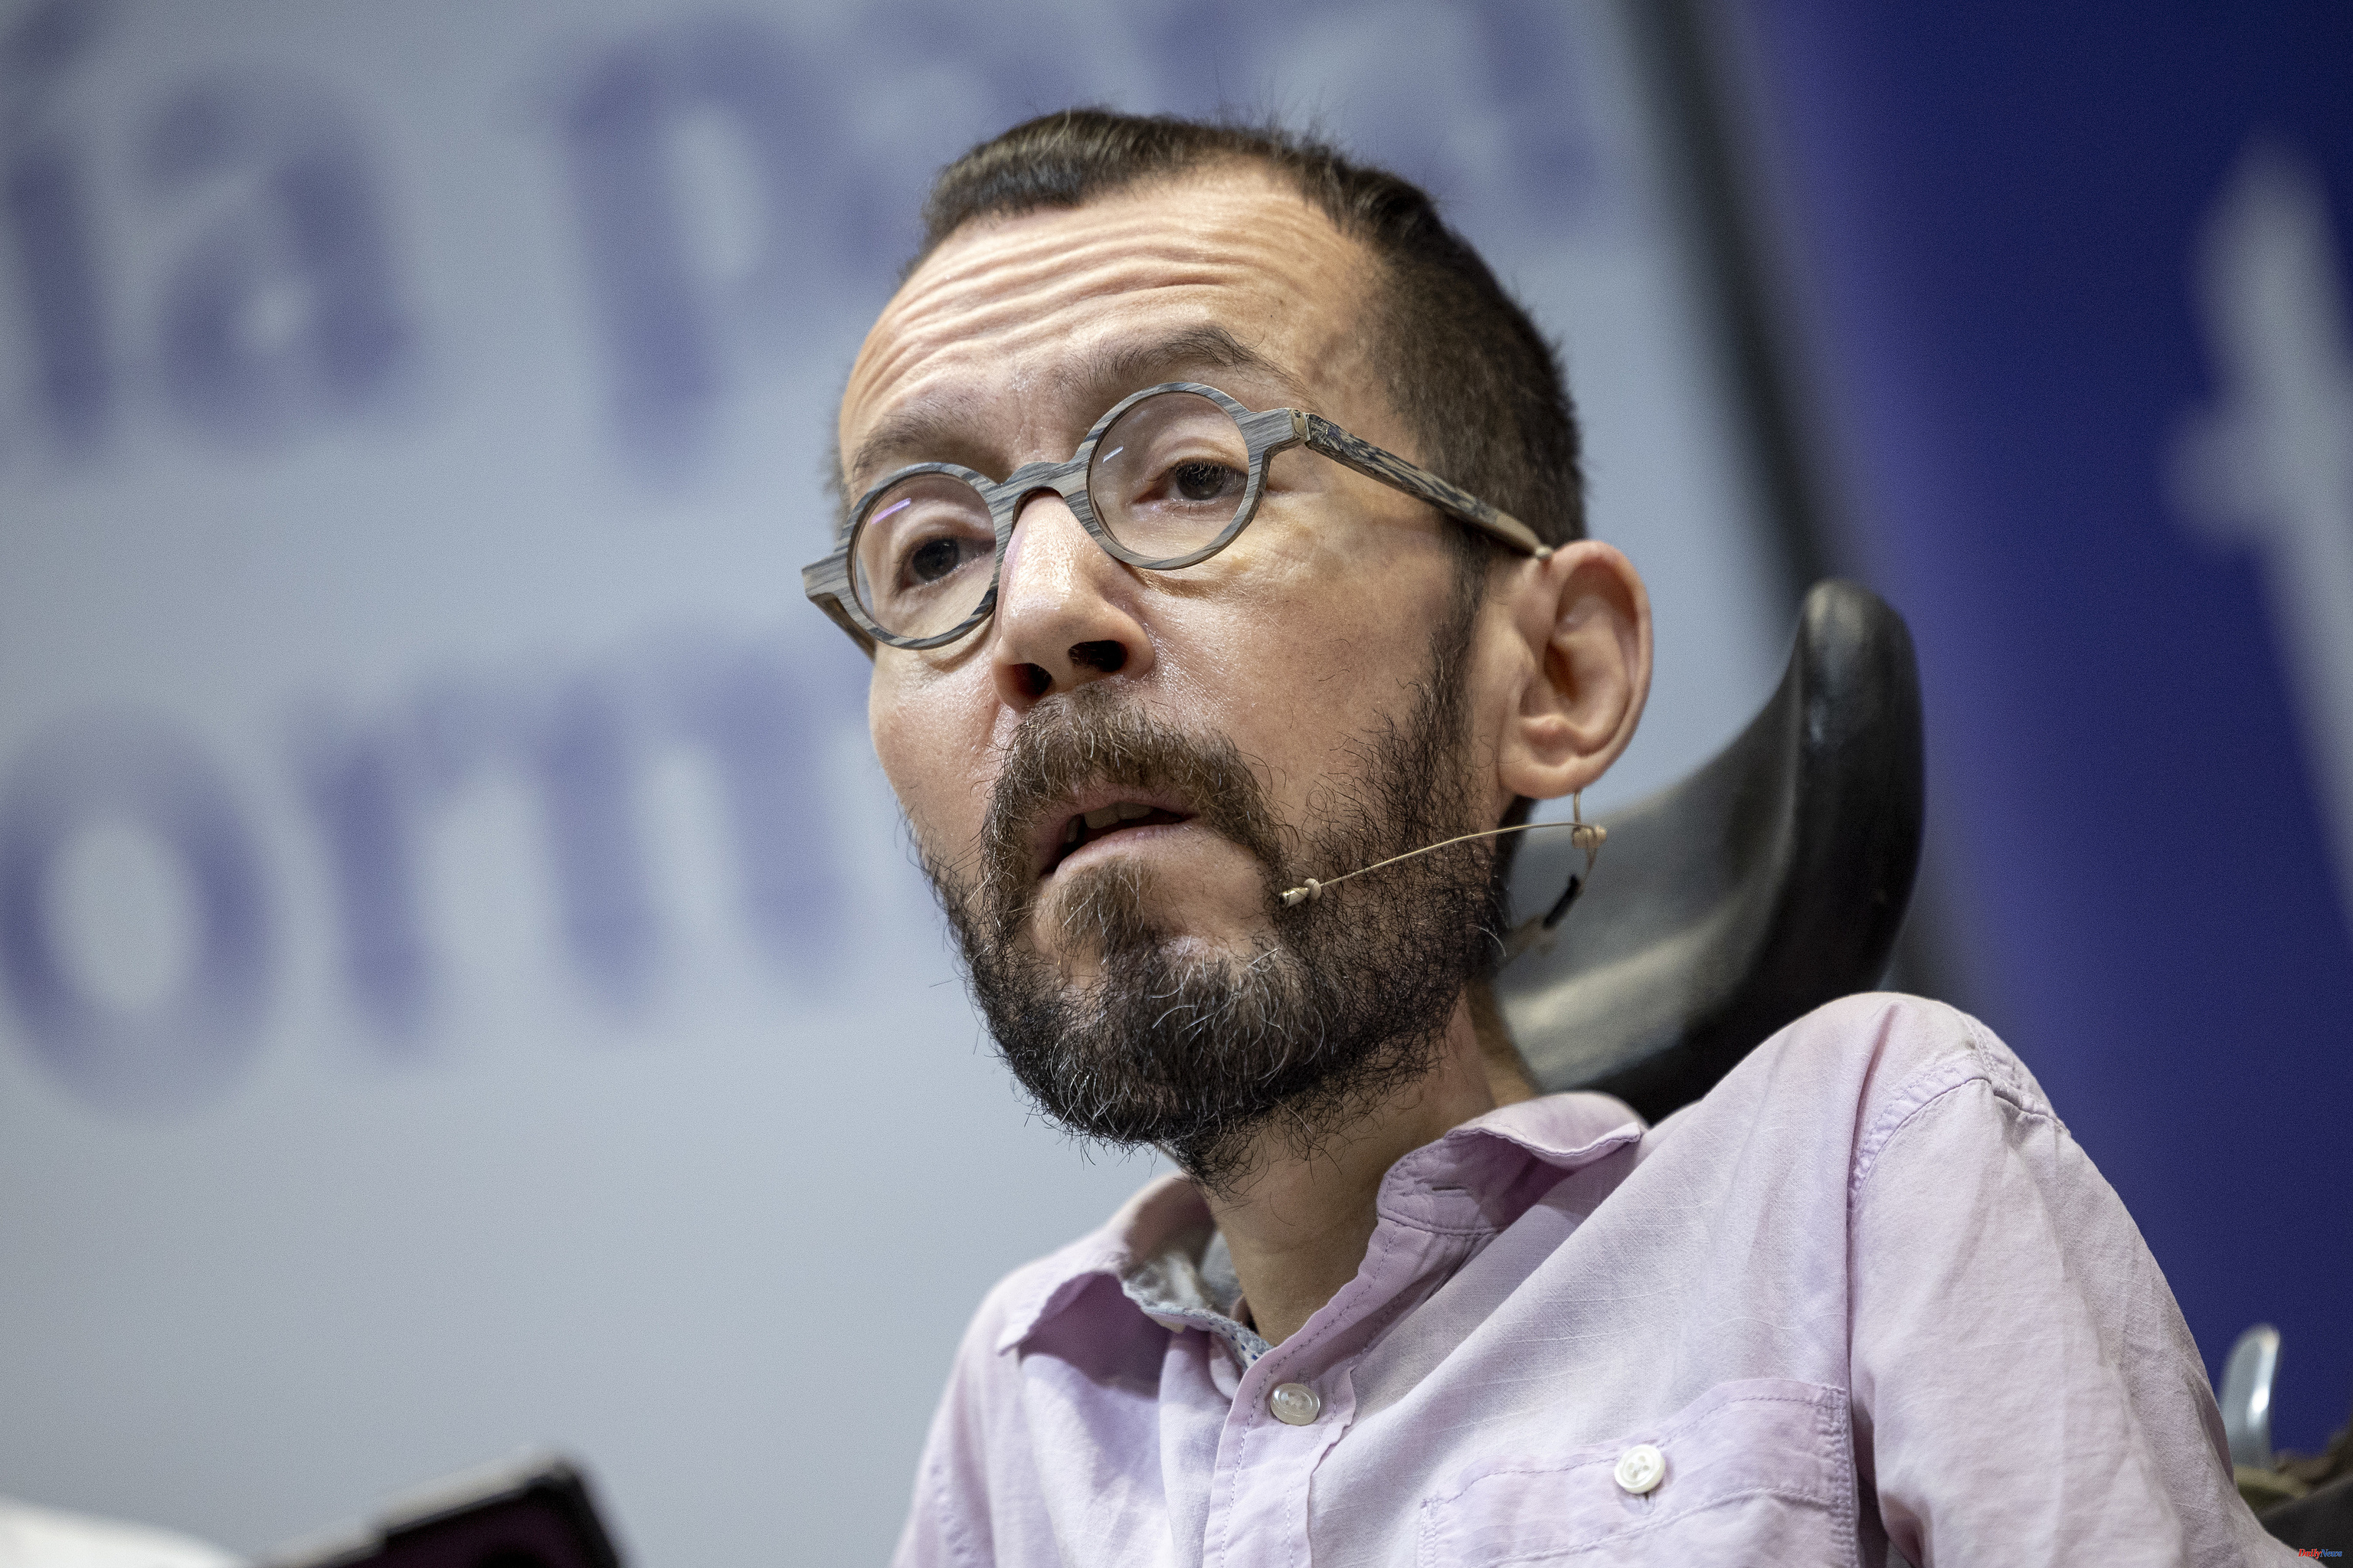 Policy Podemos proposes deprivatizing all residences and hiring relatives of dependent people as professional caregivers